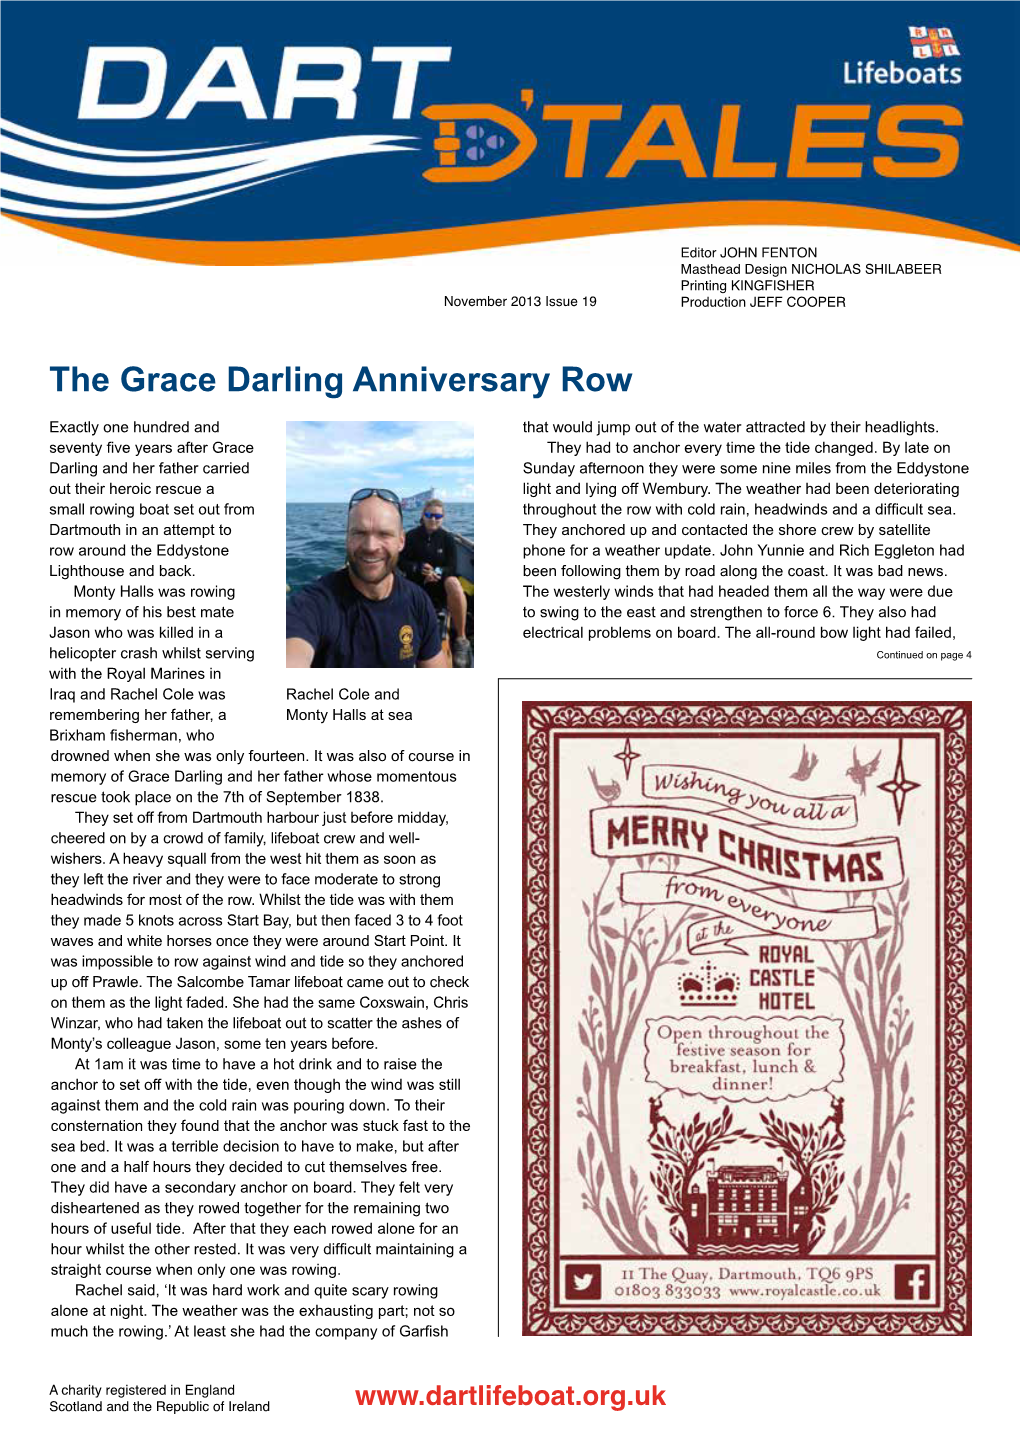 The Grace Darling Anniversary Row